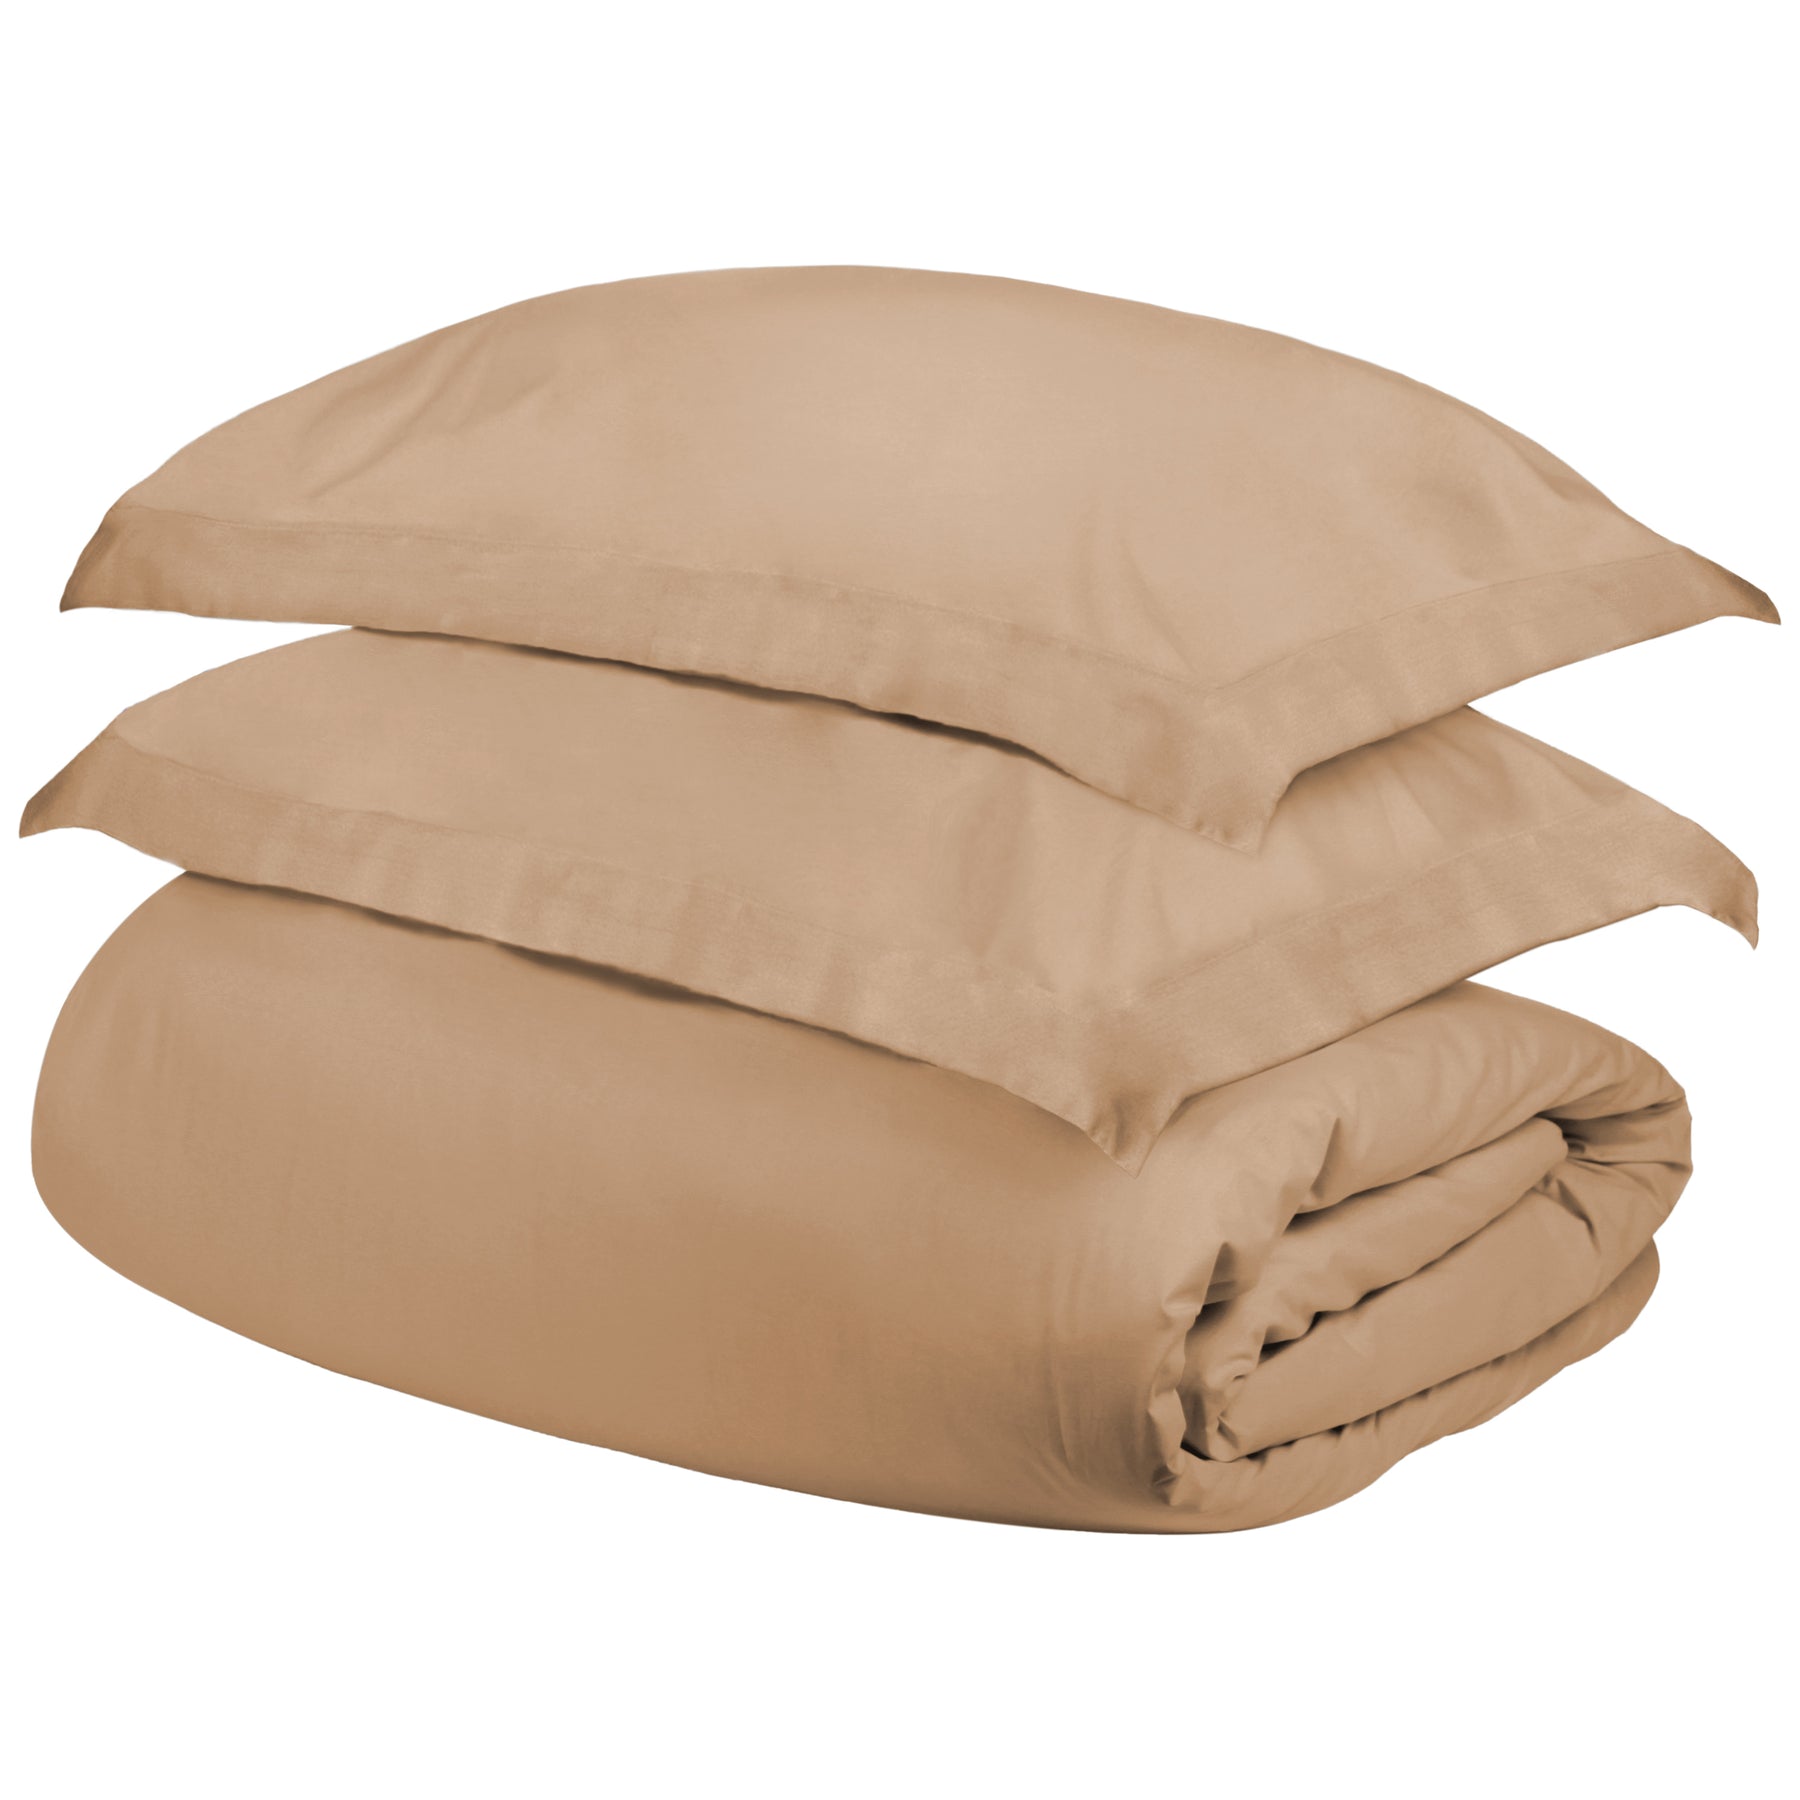 Superior Egyptian Cotton 300 Thread Count Solid Duvet Cover Set - Beige